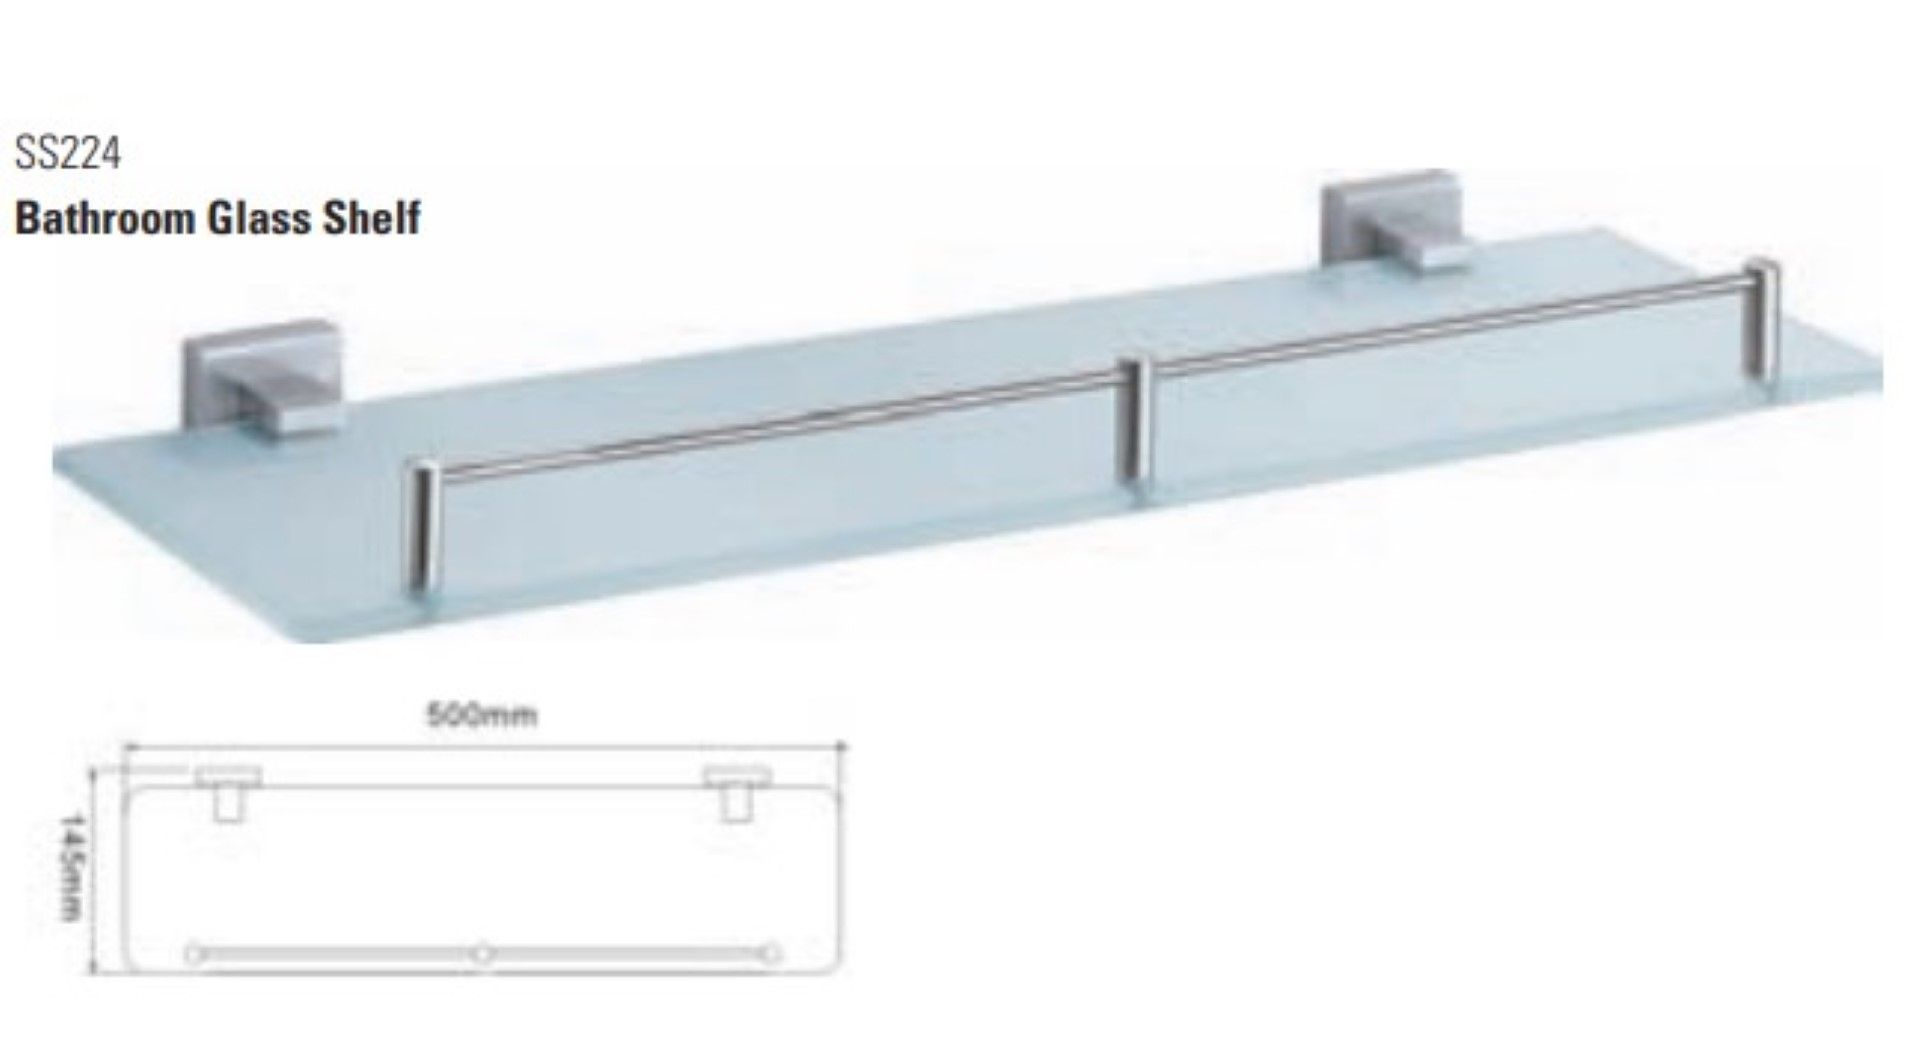 1 x Stonearth Glass Wall Mounted Shelf With Gallery Rail - Solid Stainless Steel - New - Image 2 of 3